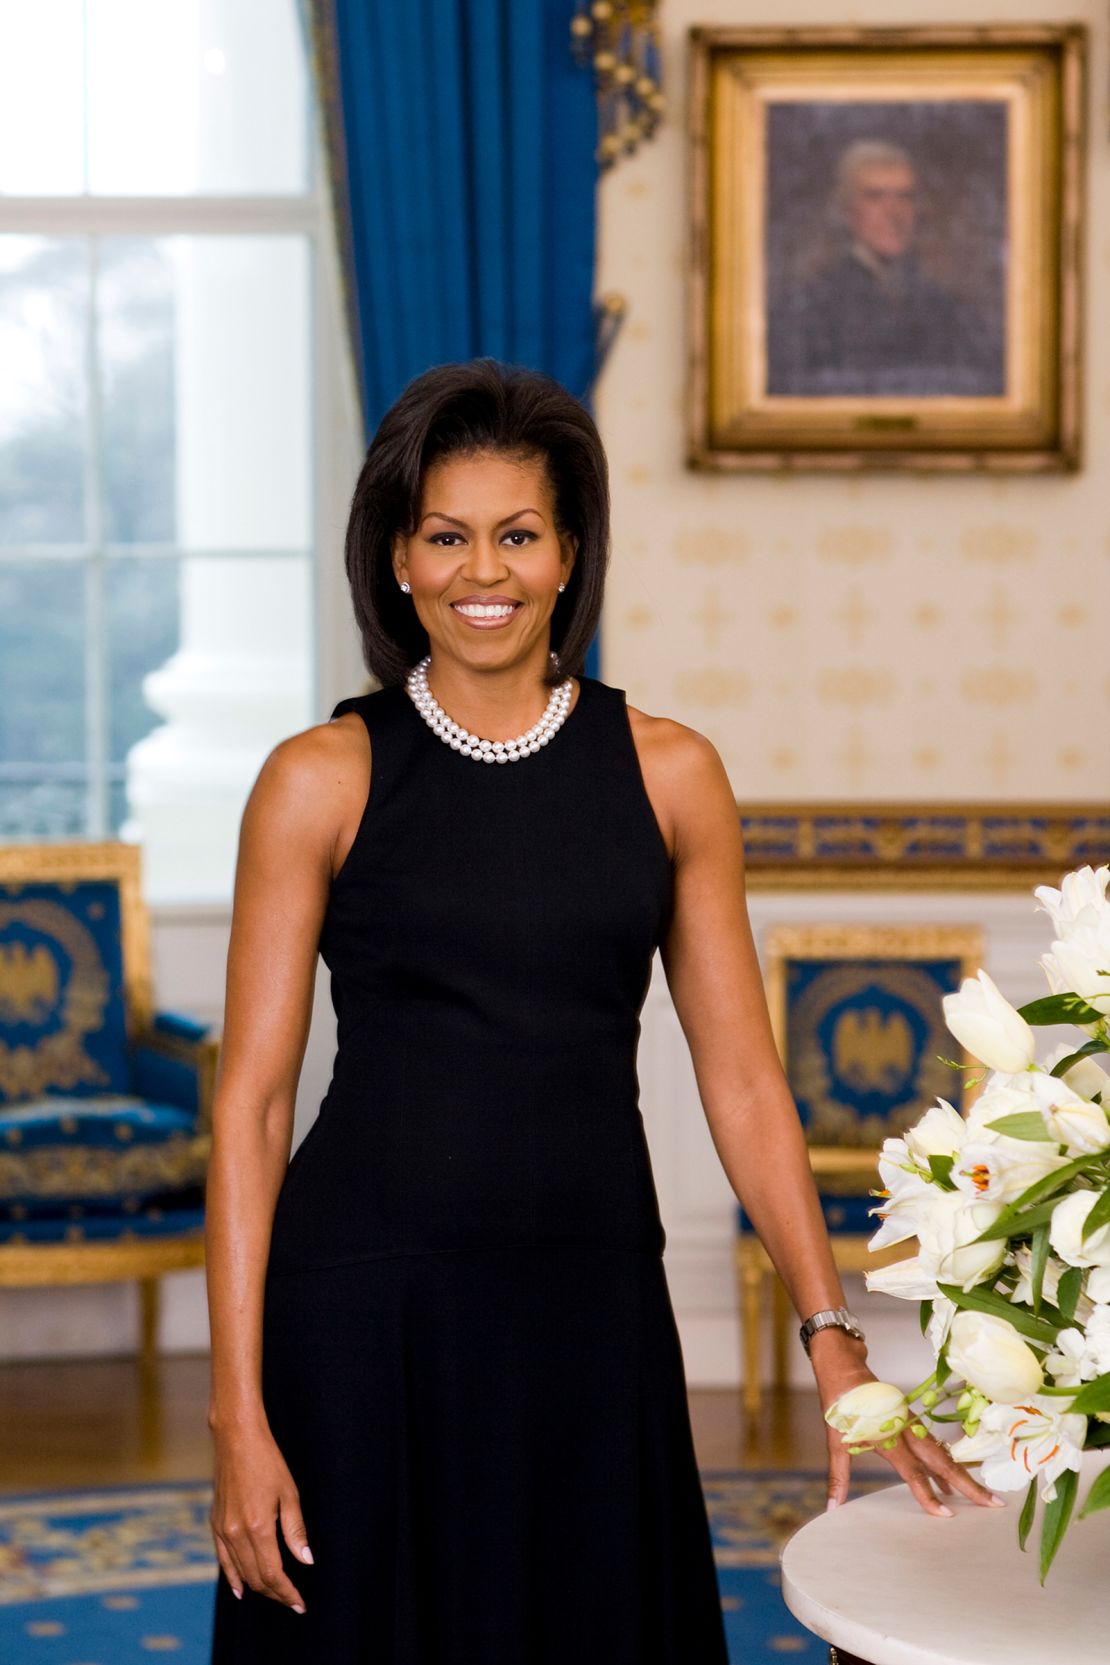 Michelle Obama poses for her official portrait in the Blue Room of the White House in February 2009.